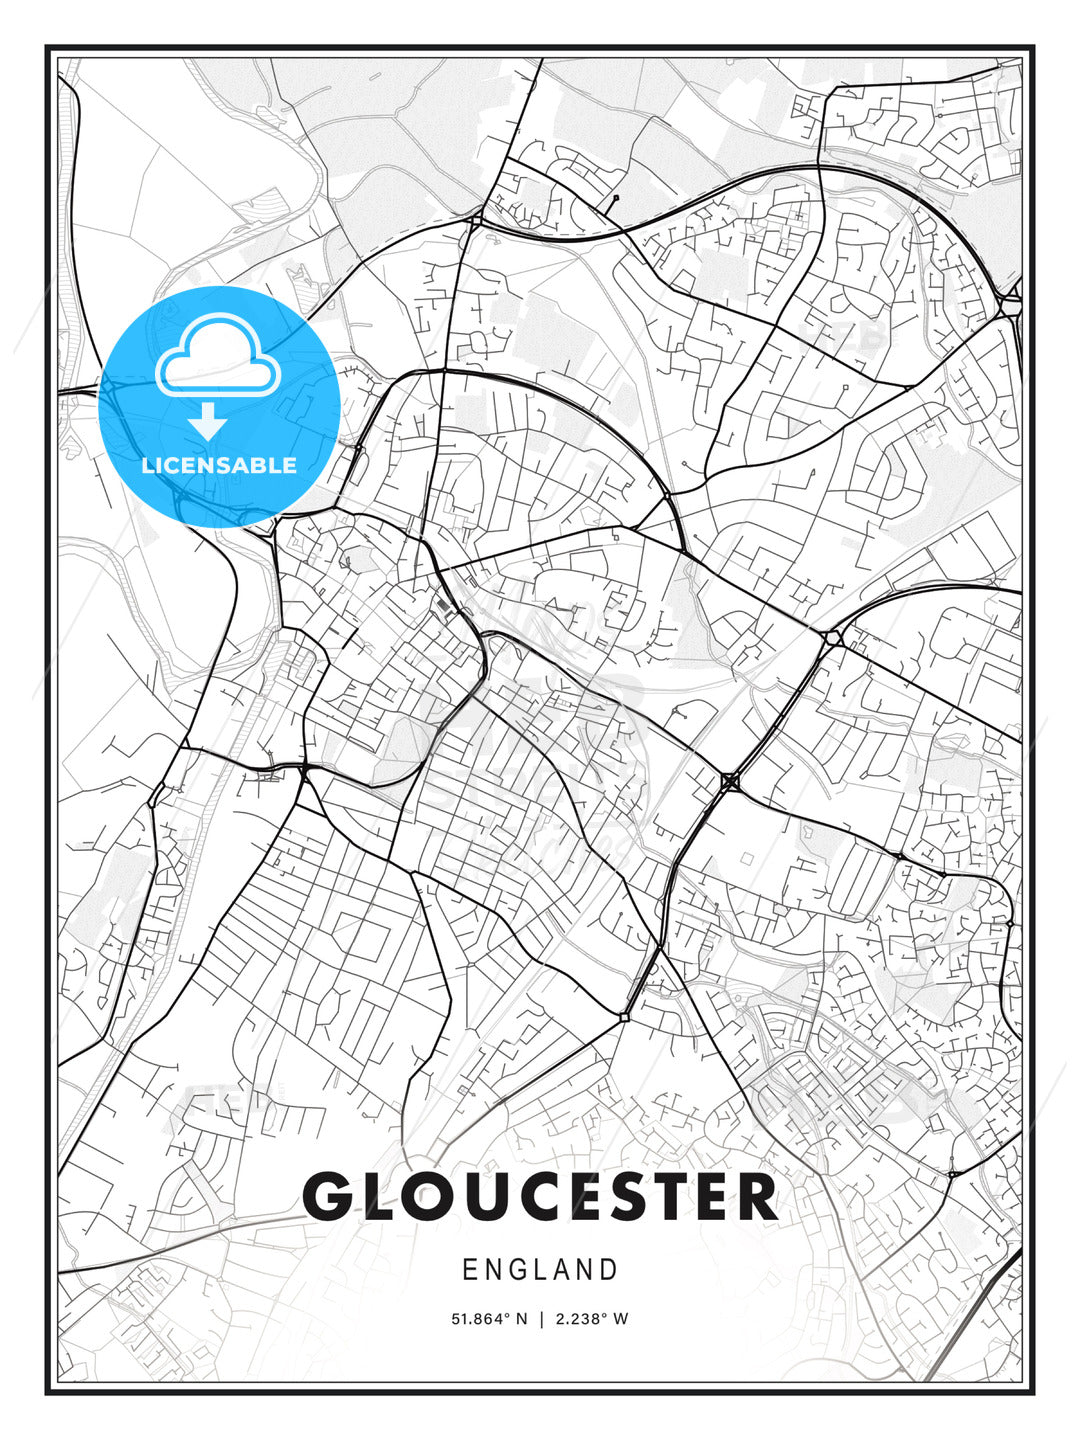 Gloucester, England, Modern Print Template in Various Formats - HEBSTREITS Sketches